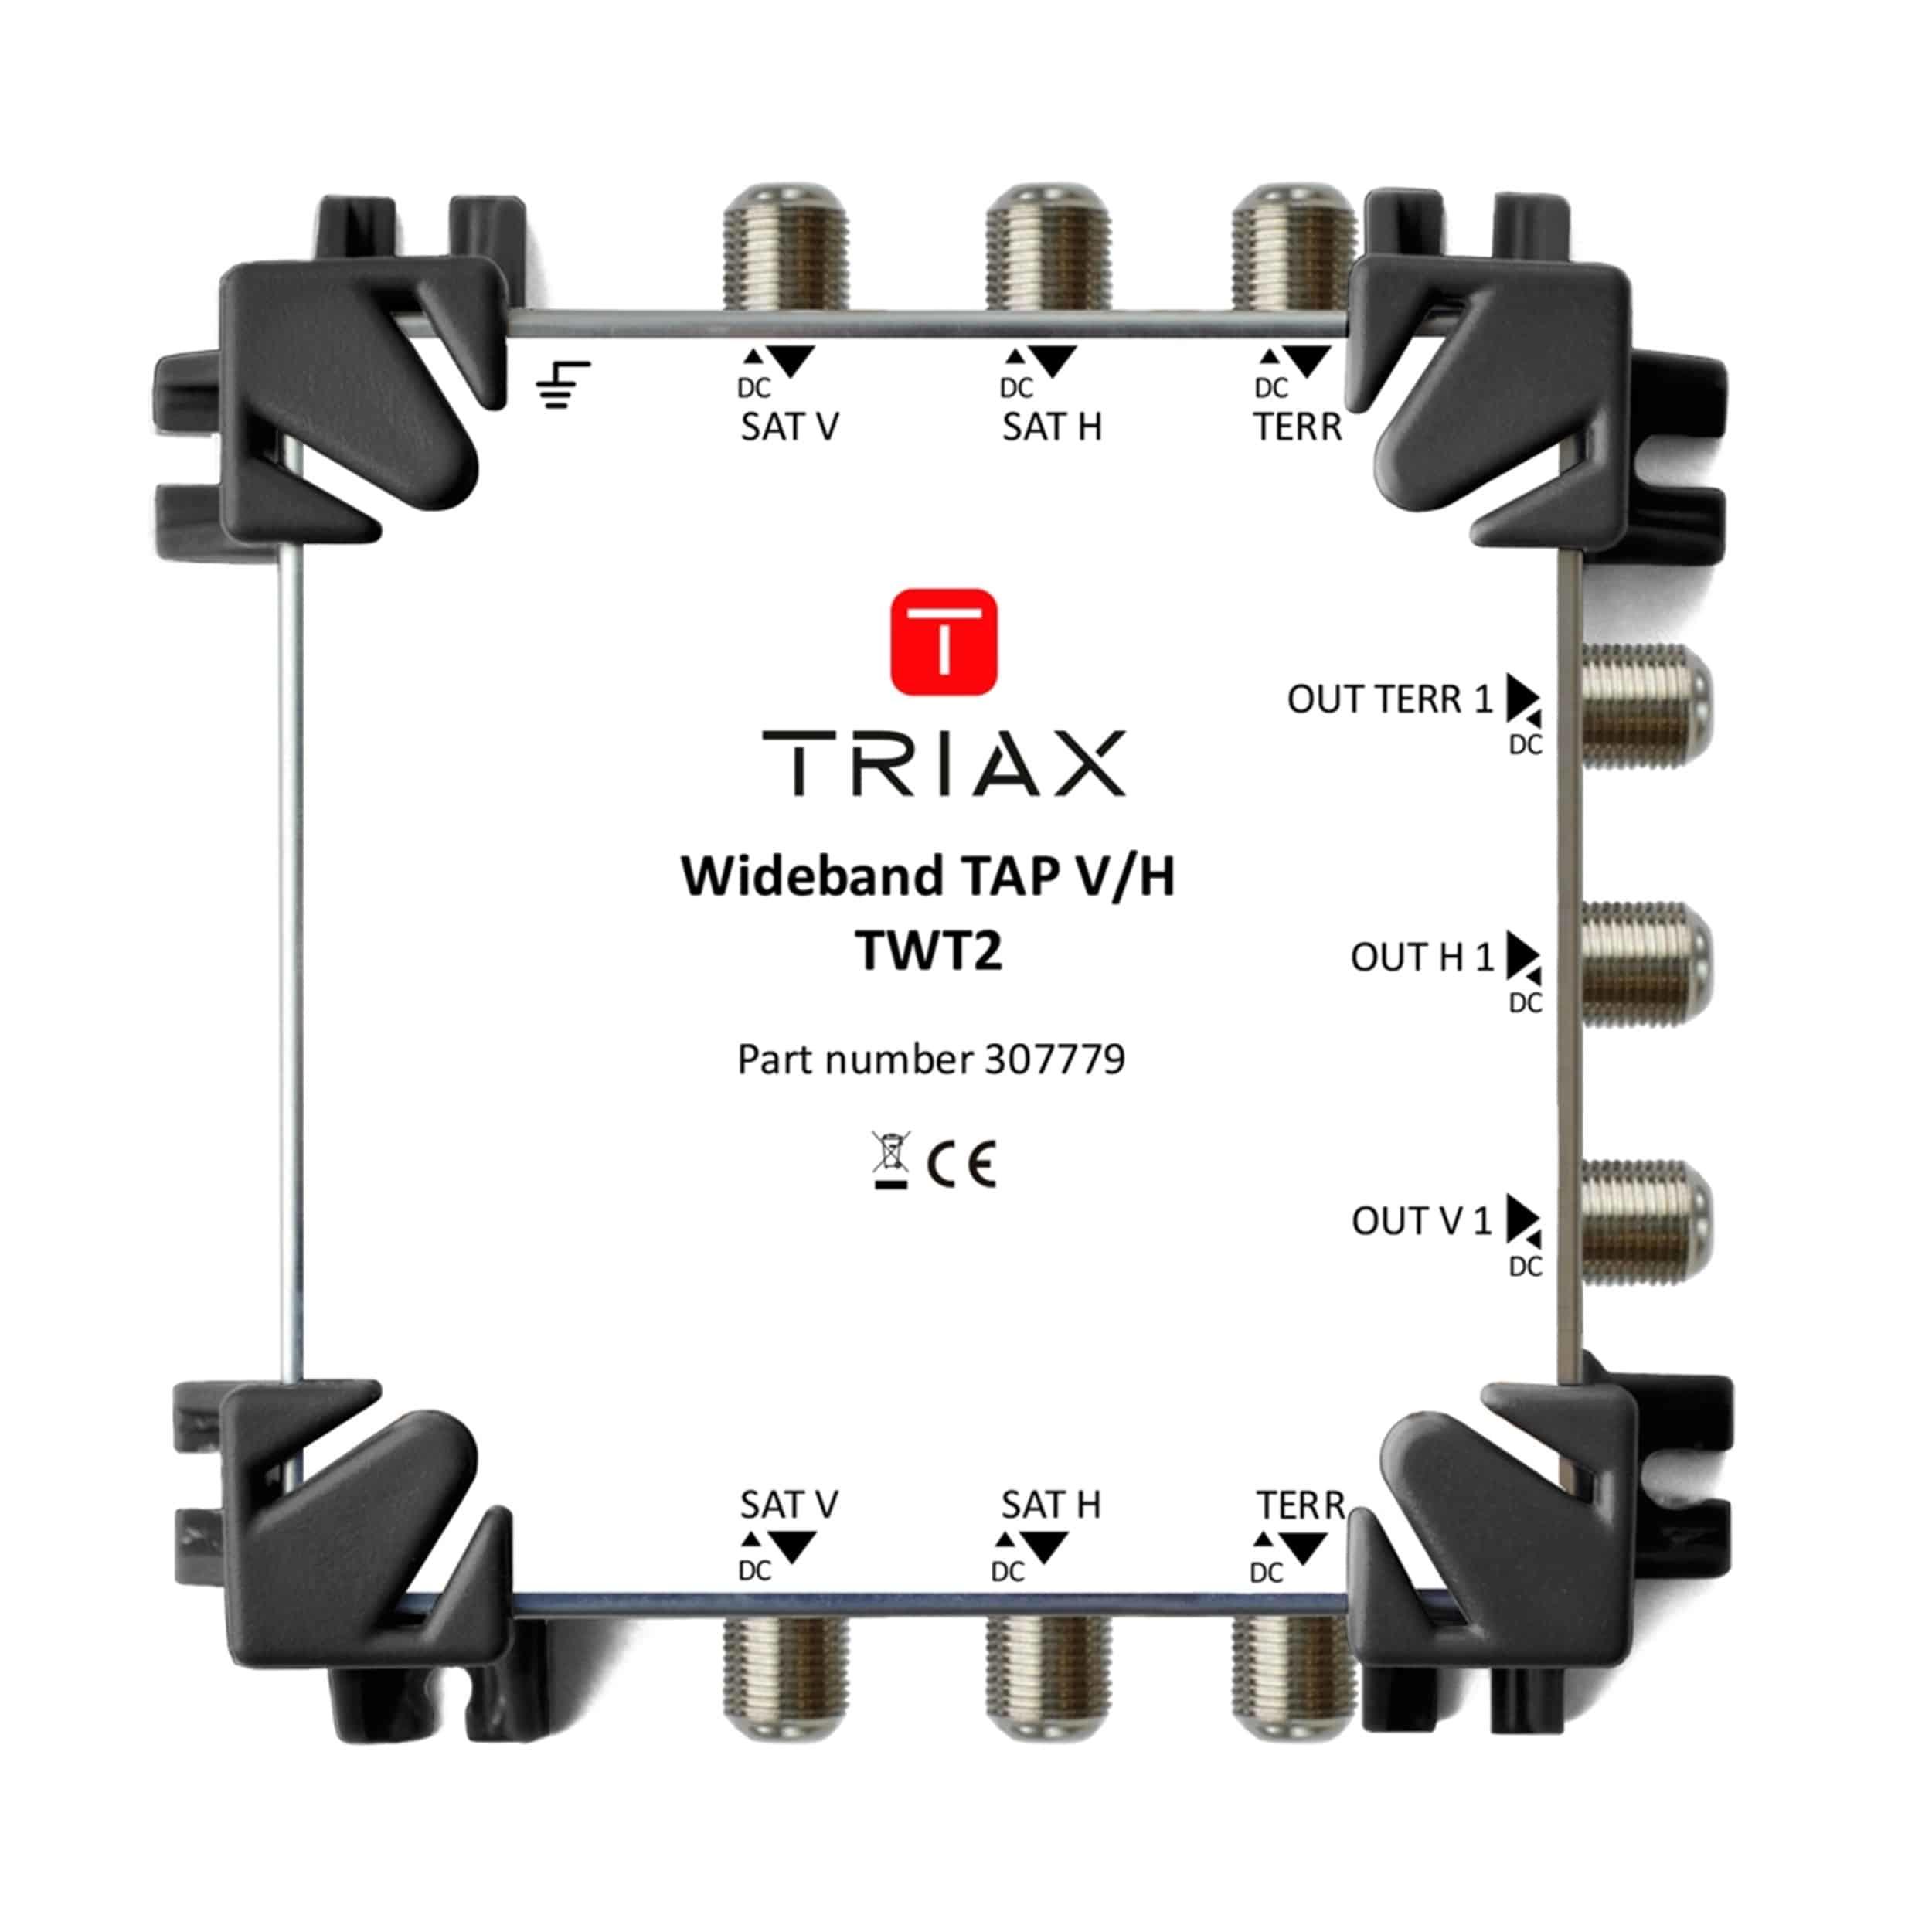 TWT2 Wideband Tap H/V